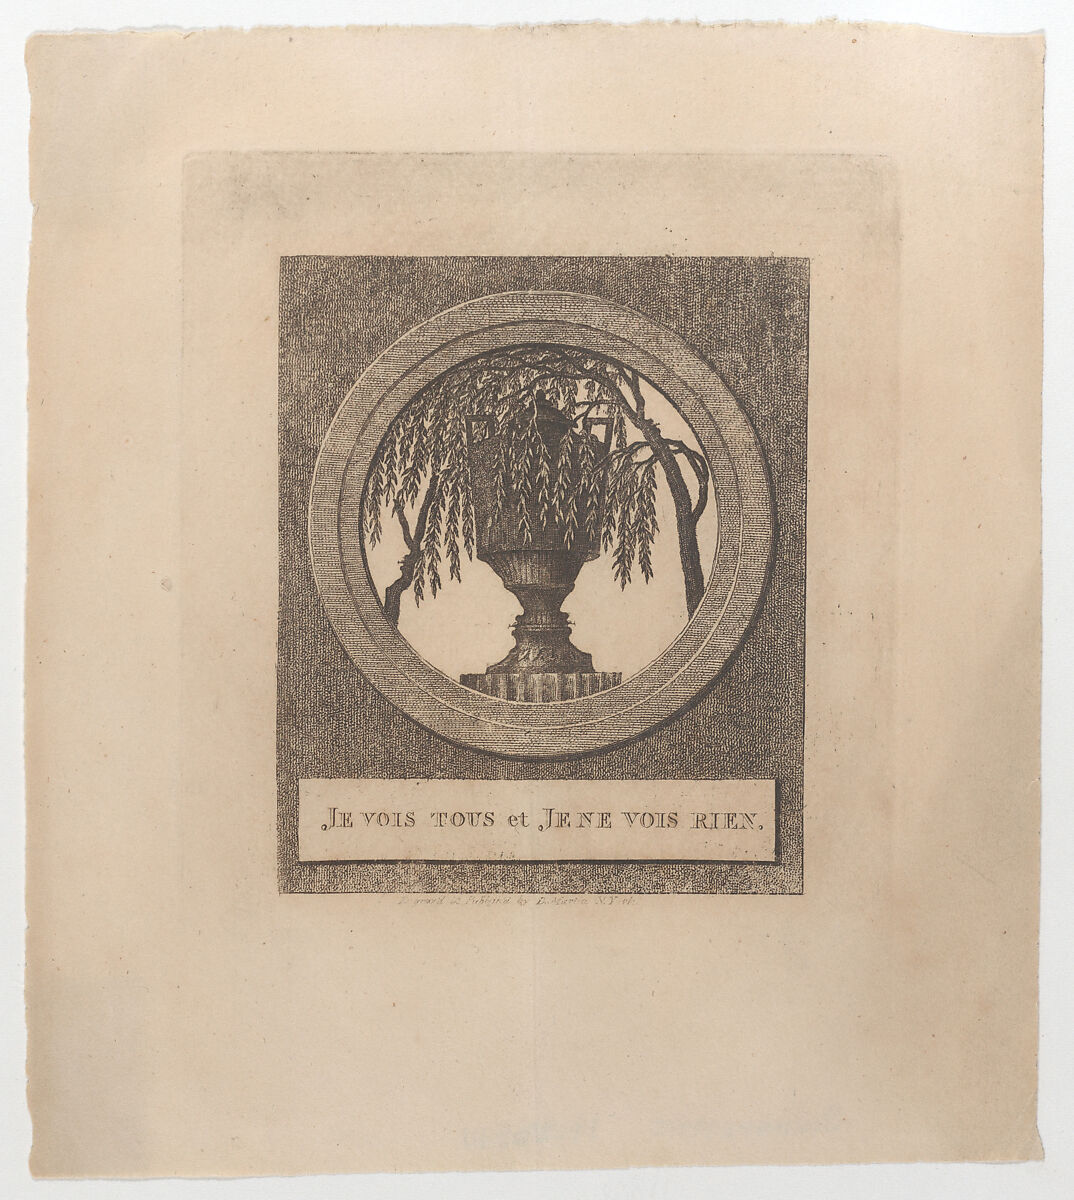 I see everything and I see nothing (Je vois tout et je ne vois rien), with hidden silhouettes of the French royal family, D. Martin (American, active New York, 1796), Etching 